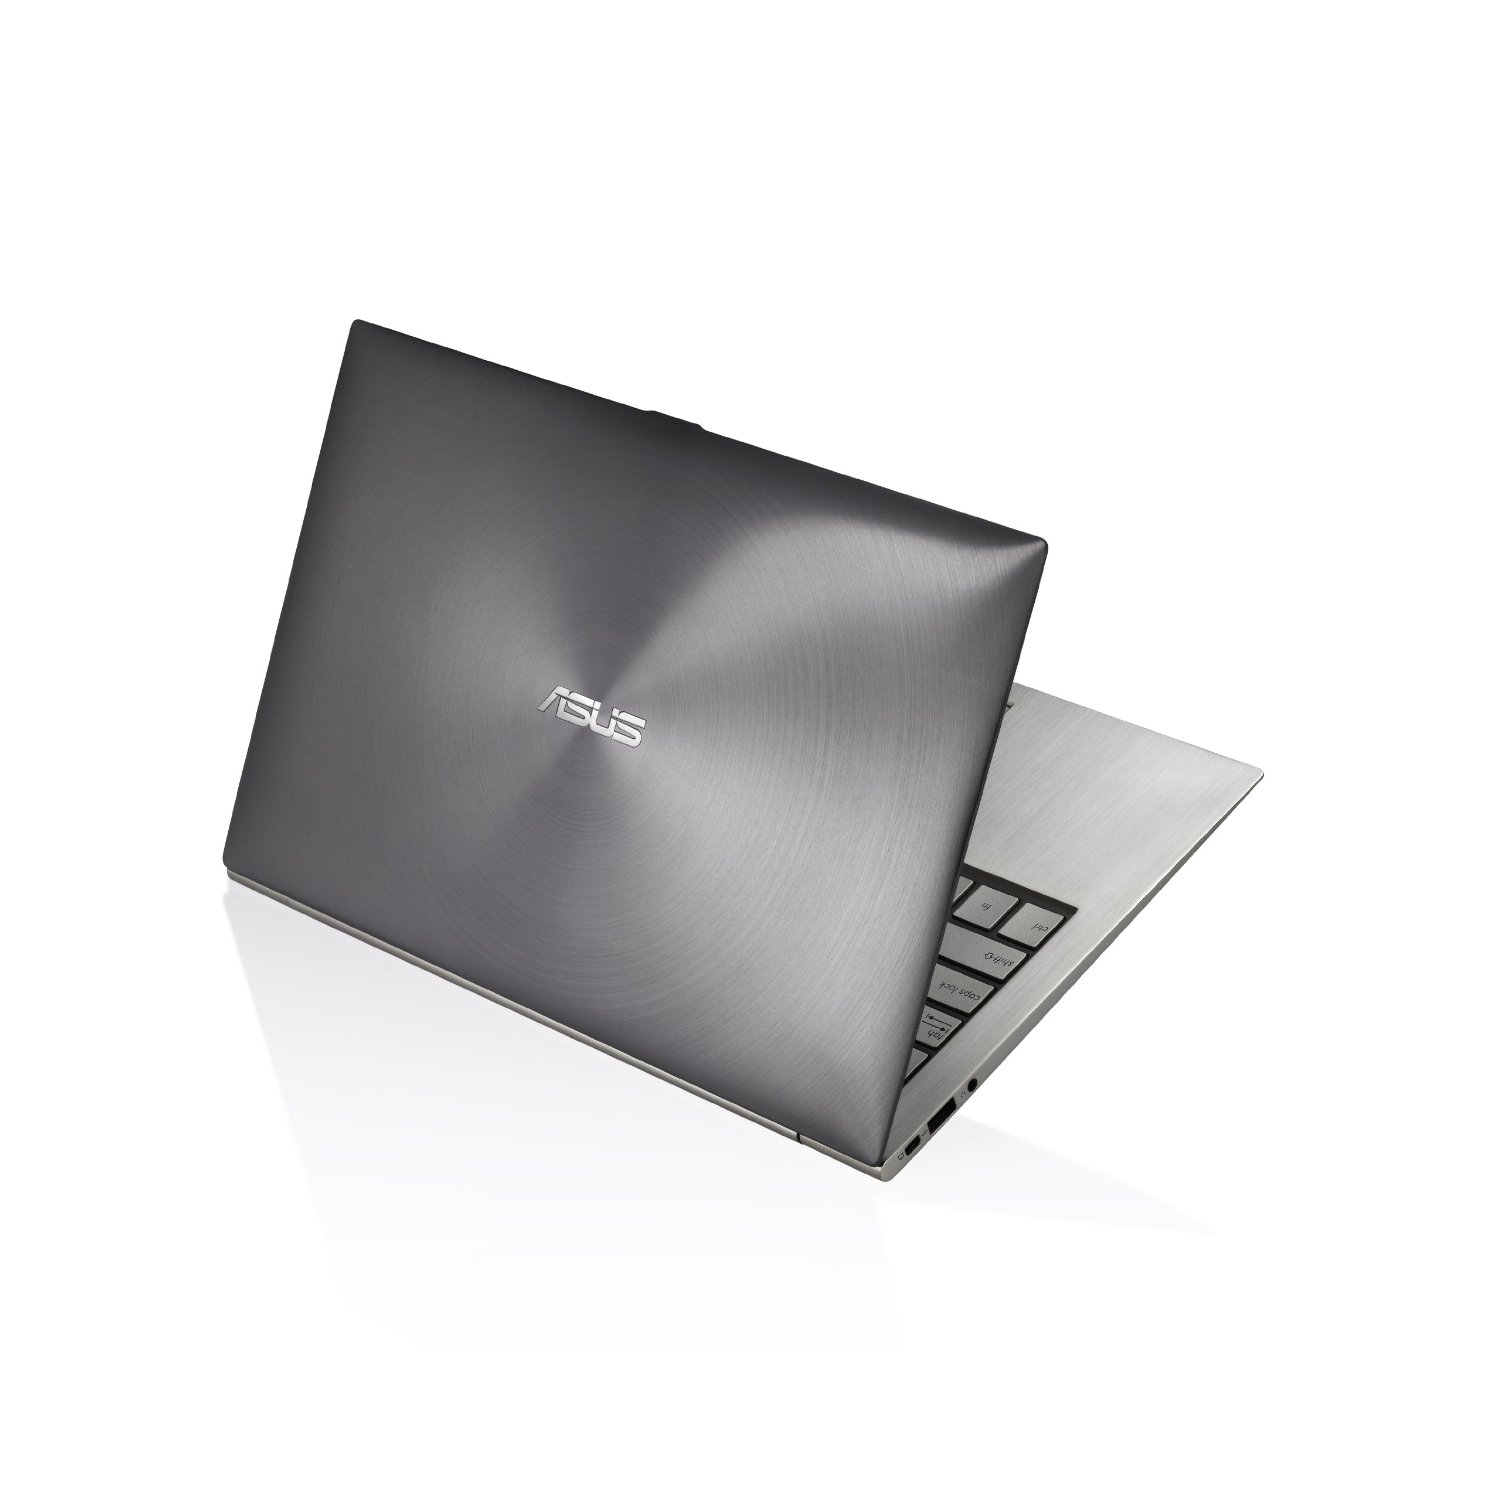 http://thetechjournal.com/wp-content/uploads/images/1112/1325329657-asus-zenbook-ux21edh71-116inch-thin-and-light-ultrabook-8.jpg